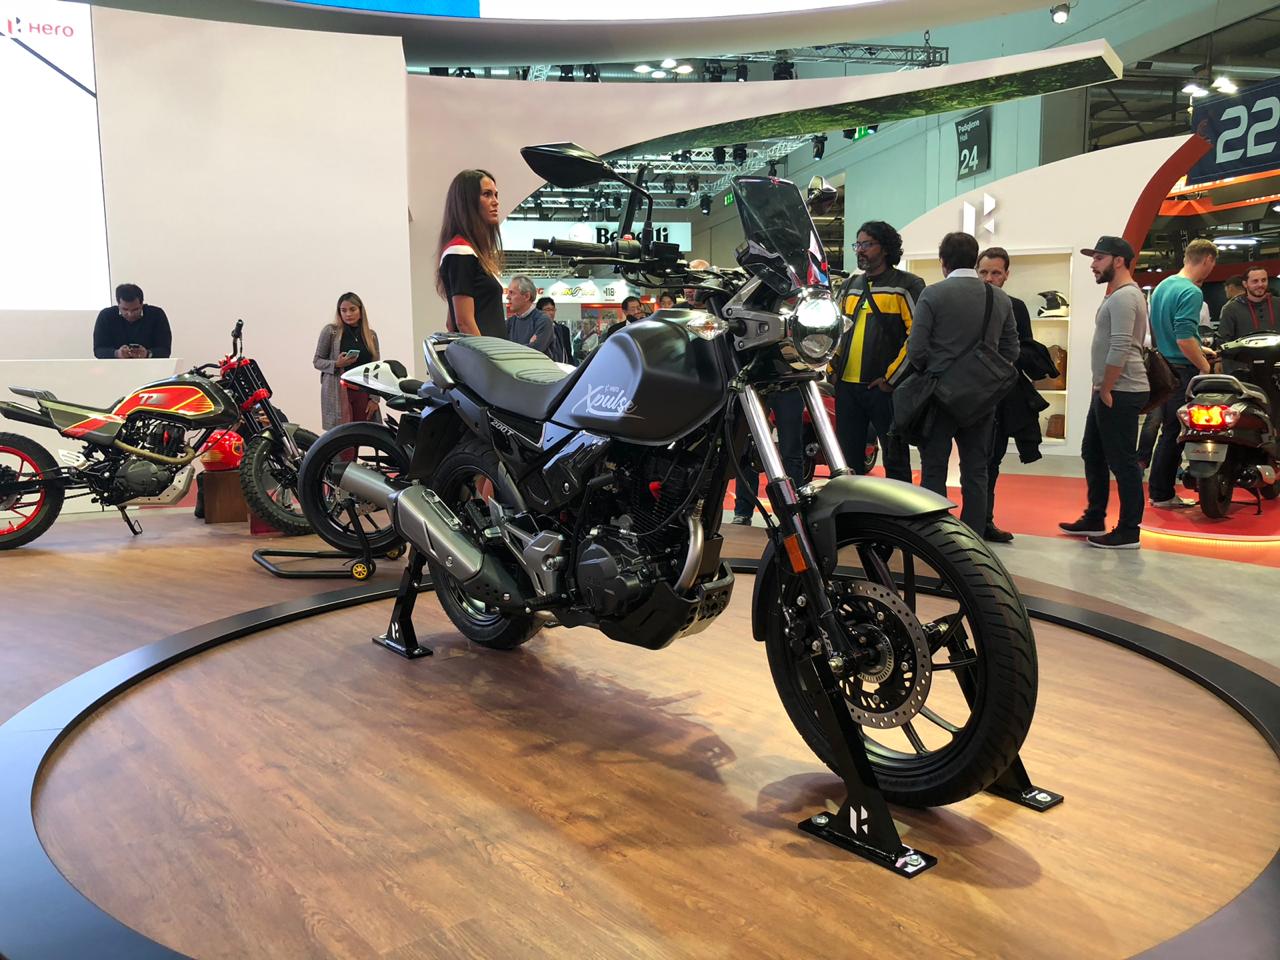 <p>Hero Motorcorp has stated that that it will launch both the Hero Xpulse 200 and the Hero Xpulse 200T in India in February 2019. These bikes will be priced around the Rs 1 to 1.1 lakh mark.</p>

<p><a href="https://bit.ly/2F6uGh1">Know more here:&nbsp;</a></p>